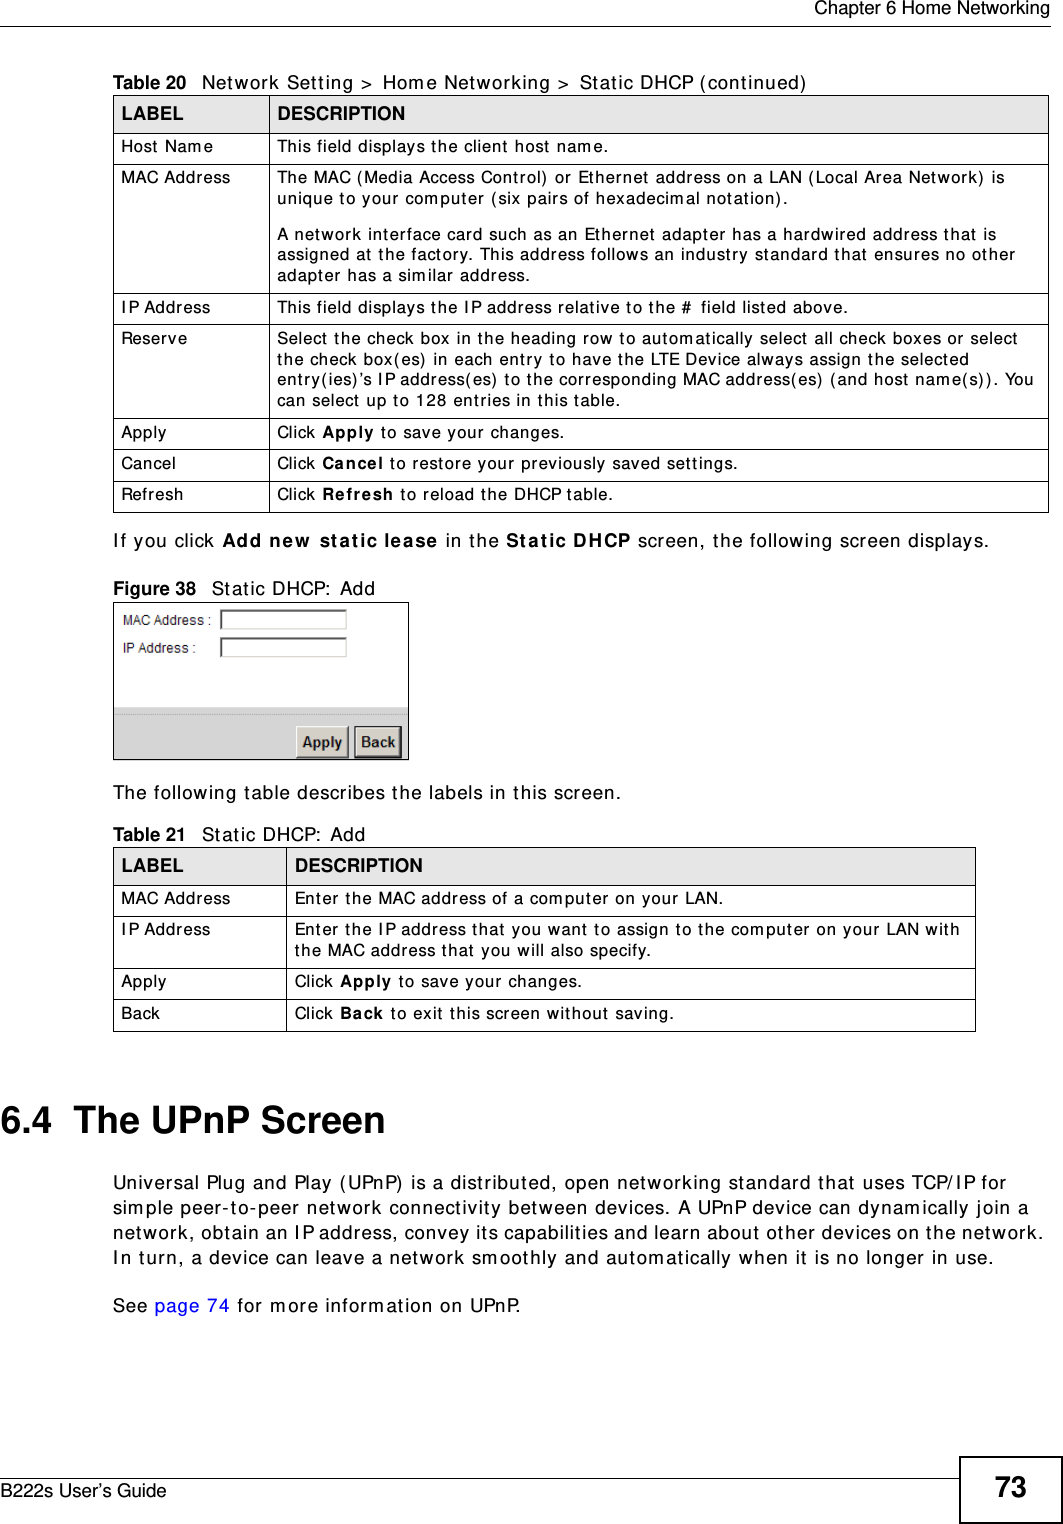  Chapter 6 Home NetworkingB222s User’s Guide 73I f you click Add ne w  st a t ic lease  in t he St at ic D HCP screen, t he following screen displays.Figure 38   St at ic DHCP:  AddThe following t able describes t he labels in t his screen.6.4  The UPnP ScreenUniversal Plug and Play ( UPnP)  is a dist r ibut ed, open net working st andard t hat  uses TCP/ I P for sim ple peer- to- peer net w ork connect ivit y bet ween devices. A UPnP device can dynam ically j oin a network, obtain an I P address, convey it s capabilit ies and learn about  ot her devices on t he net work. I n t urn, a device can leave a net w ork sm oothly and autom atically w hen it  is no longer in use.See page 74 for m ore inform at ion on UPnP.Host Nam e This field displays the client  host nam e.MAC Address The MAC (Media Access Cont rol)  or Et hernet  addr ess on a LAN ( Local Ar ea Networ k)  is unique t o your com put er ( six pairs of hexadecim al not ation) .A network interface card such as an Ethernet adapter has a hardwired address t hat  is assigned at the factory. This address follows an indust ry st andard t hat  ensures no ot her adapter has a sim ilar address.I P Address This field displays t he I P address relative t o t he #  field list ed above.Reserve Select  the check box in t he heading row  to aut om at ically select  all check boxes or select the check box( es)  in each ent ry  t o have t he LTE Device always assign t he selected ent ry ( ies) ’s I P address(es)  t o t he corresponding MAC address( es)  ( and host  nam e(s)) . You can select up to 128 ent ries in t his t able. Apply Click Apply t o save your changes.Cancel Click Ca ncel t o rest ore your previously saved sett ings.Refresh Click Re fresh  t o reload t he DHCP t able.Table 21   Static DHCP:  AddLABEL DESCRIPTIONMAC Address Ent er the MAC address of a com puter on your LAN.I P Address Enter t he I P address t hat  you want to assign to t he com put er on your LAN w ith t he MAC addr ess t hat  you will also specify.Apply Click Apply  to save your changes.Back Click Back  t o exit  t his screen w it hout  saving.Table 20   Network Sett ing &gt;  Hom e Net working &gt;  Stat ic DHCP ( cont inued)LABEL DESCRIPTION